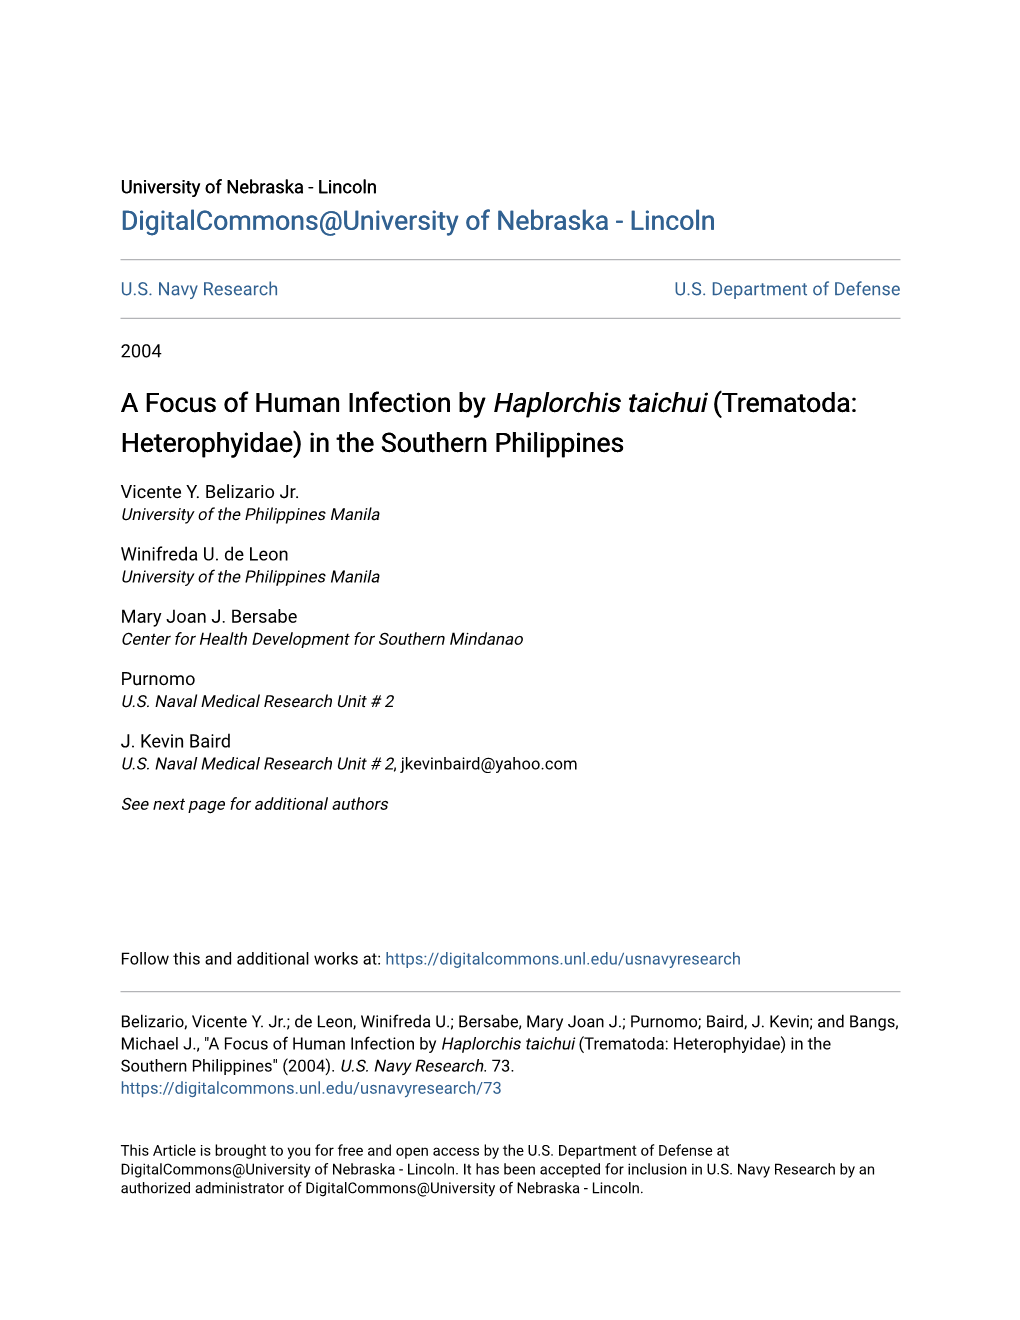 A Focus of Human Infection by Haplorchis Taichui (Trematoda: Heterophyidae) in the Southern Philippines